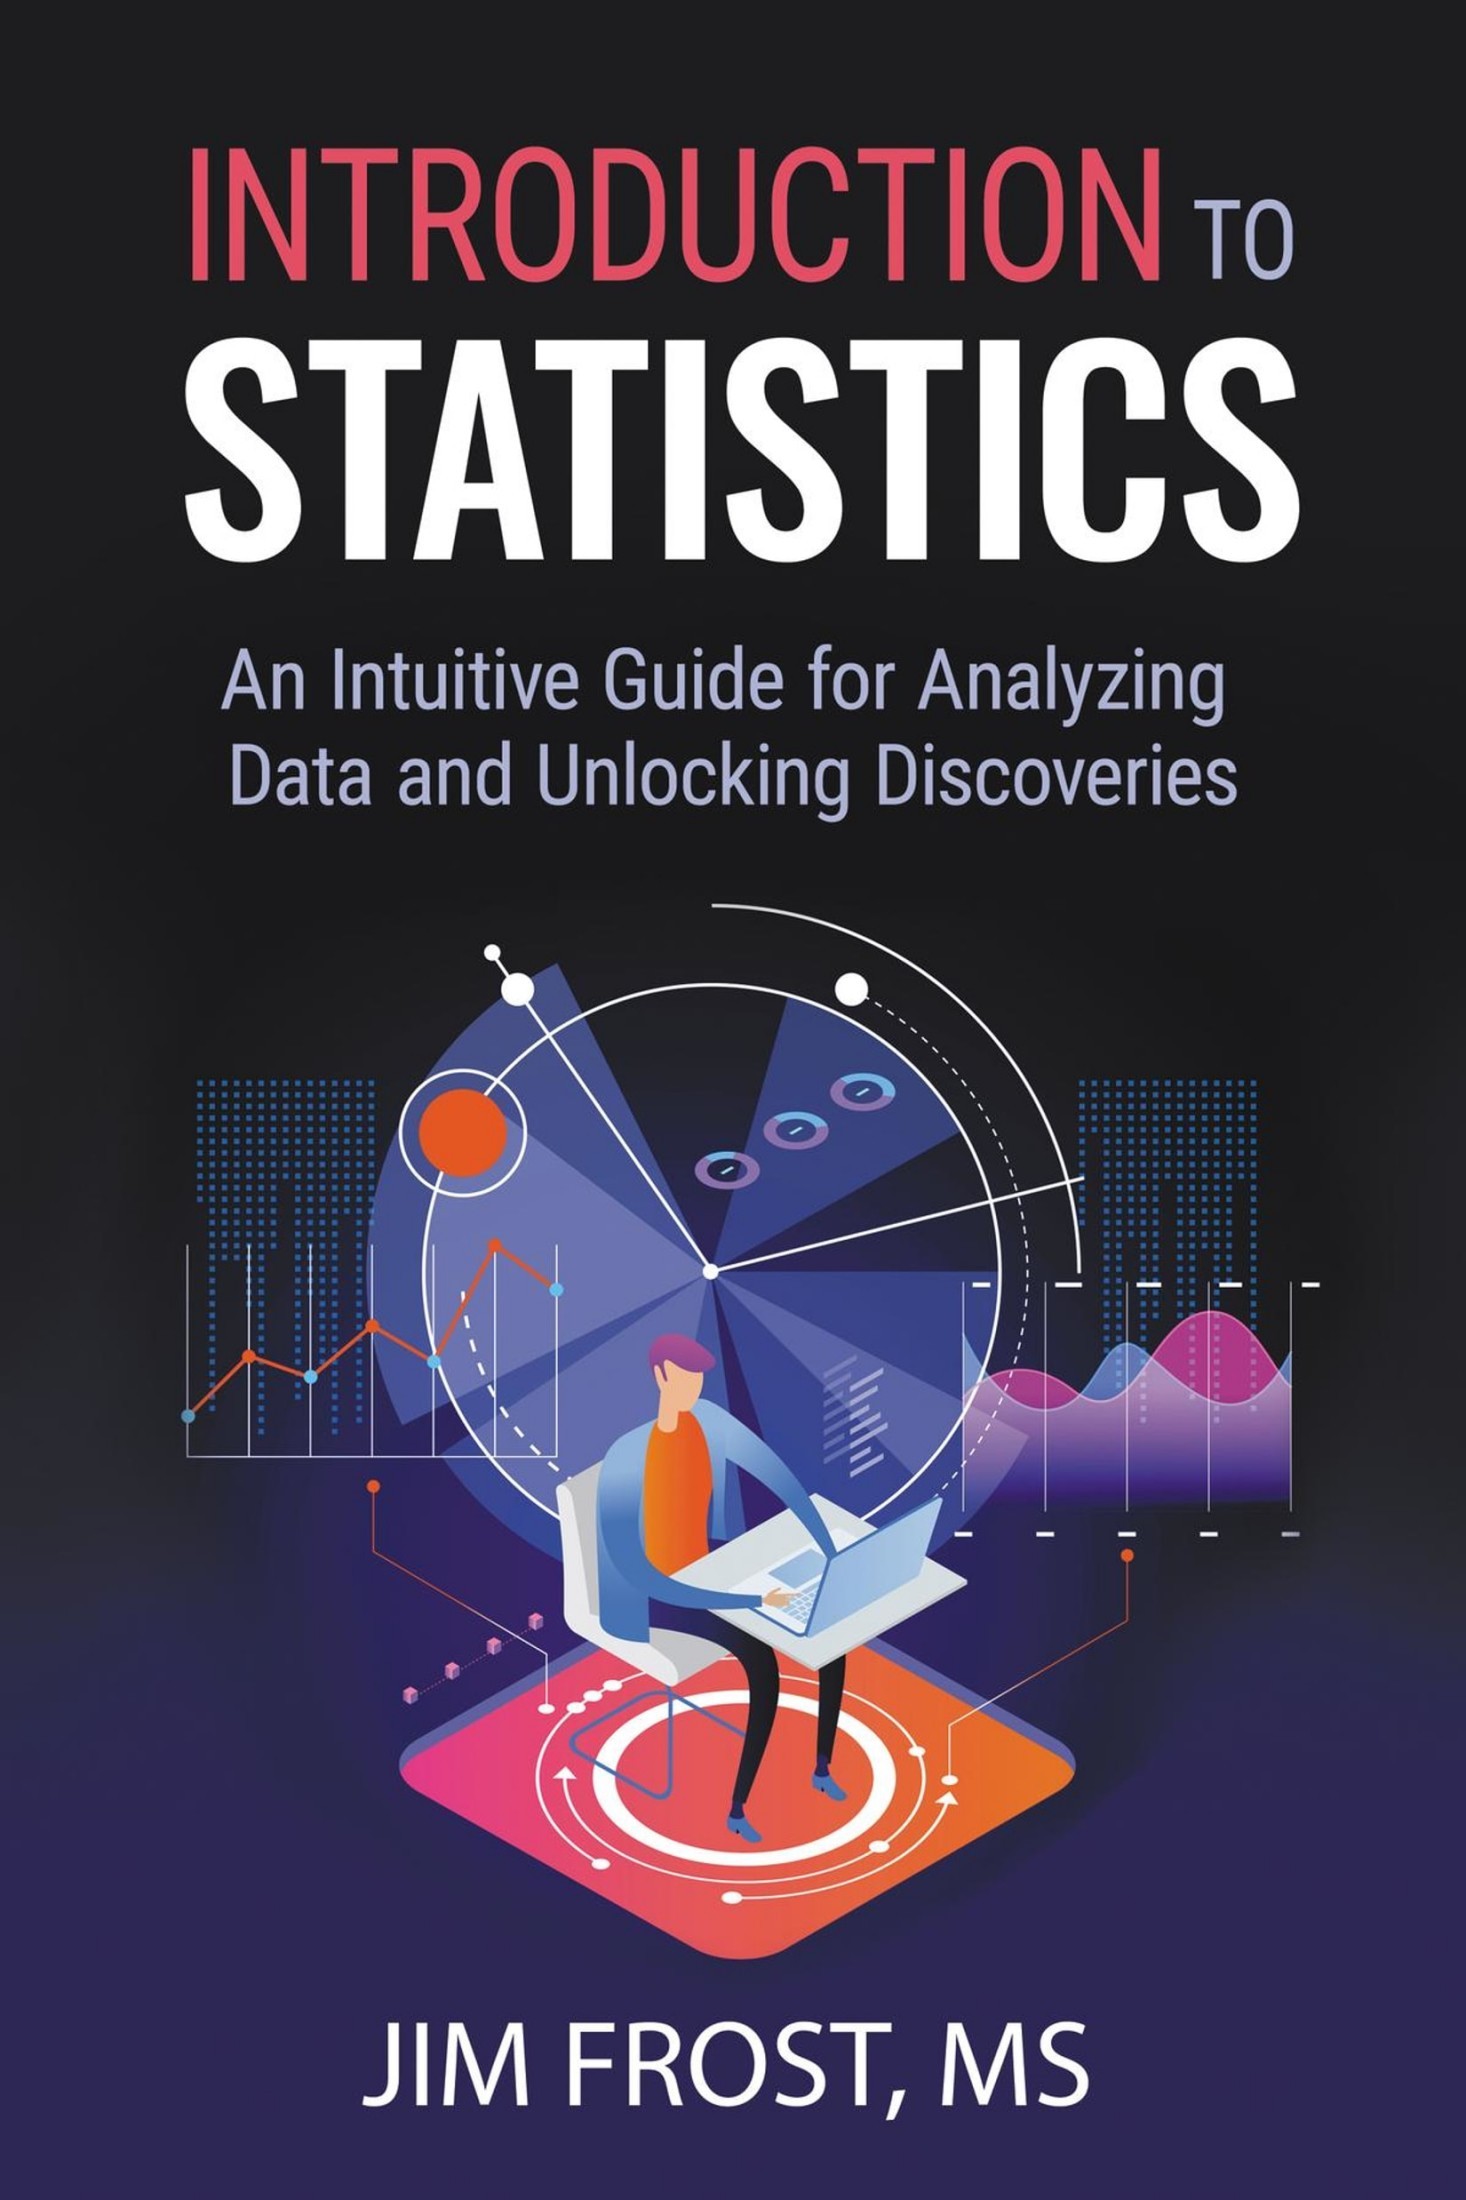 Introduction to Statistics: An Intuitive Guide for Analyzing Data and Unlocking Discoveries